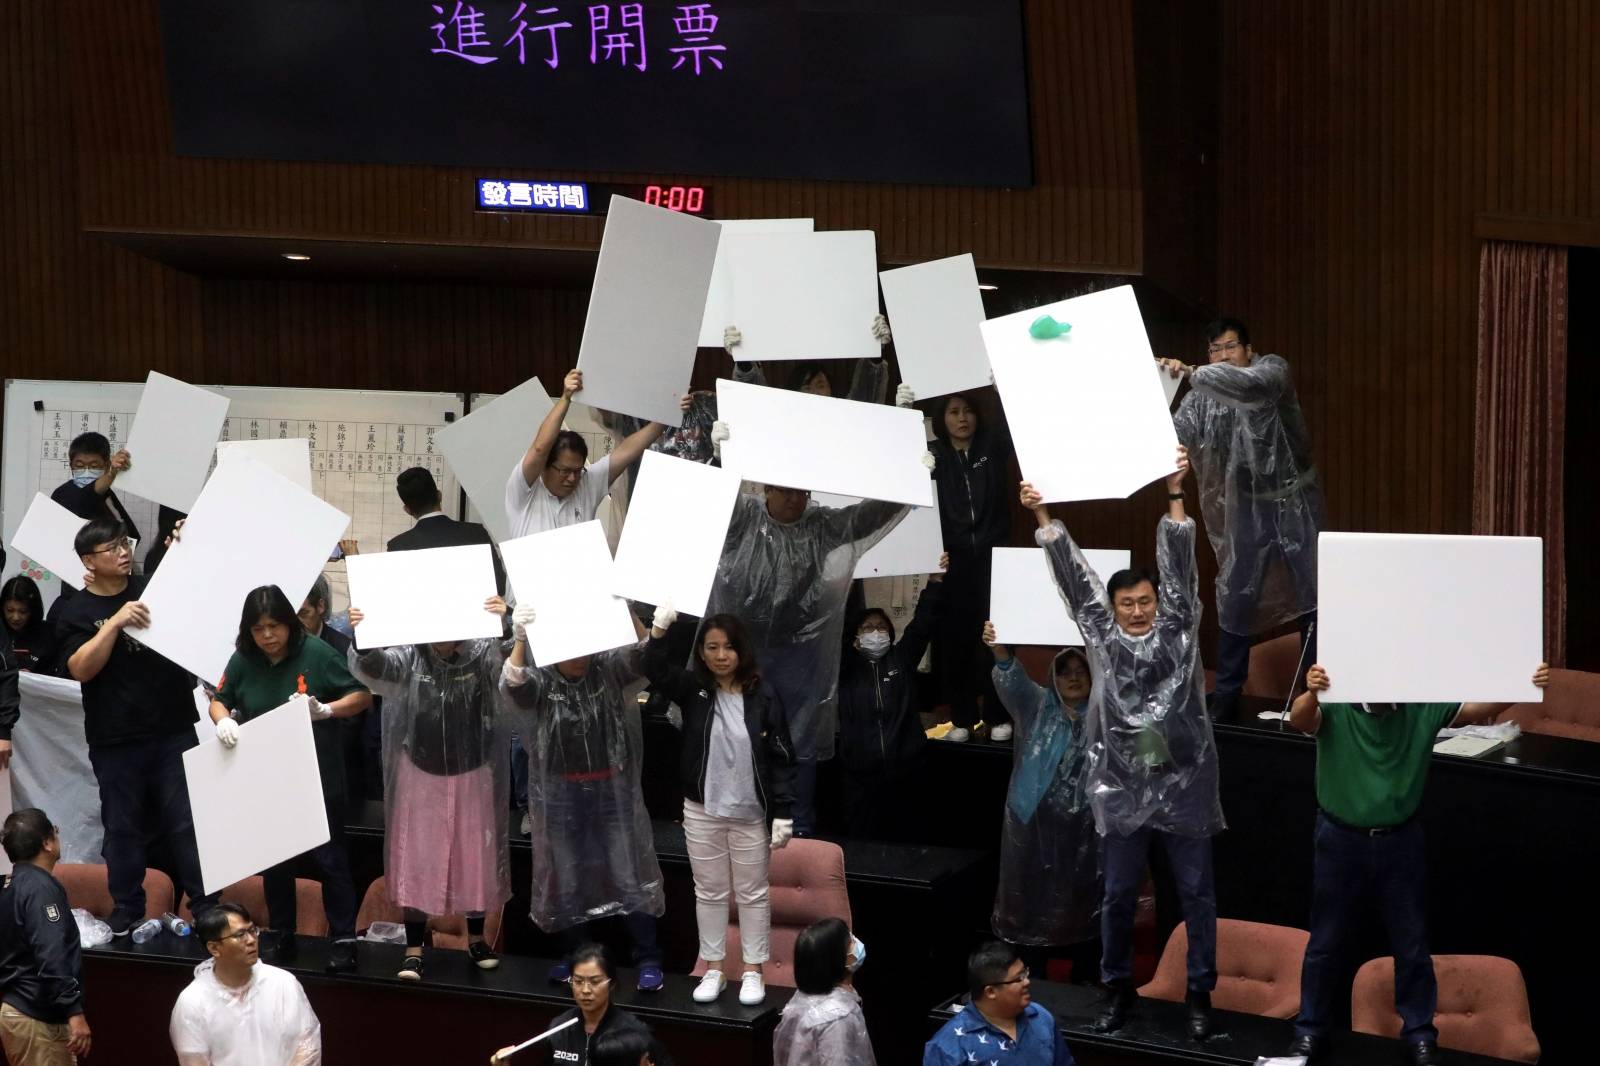 Lawmakers from Taiwan's ruling Democratic Progressive Party (DPP) with lawmakers from the main opposition Kuomintang (KMT) party throw water ballons at each other inside the parliament in Taipei,